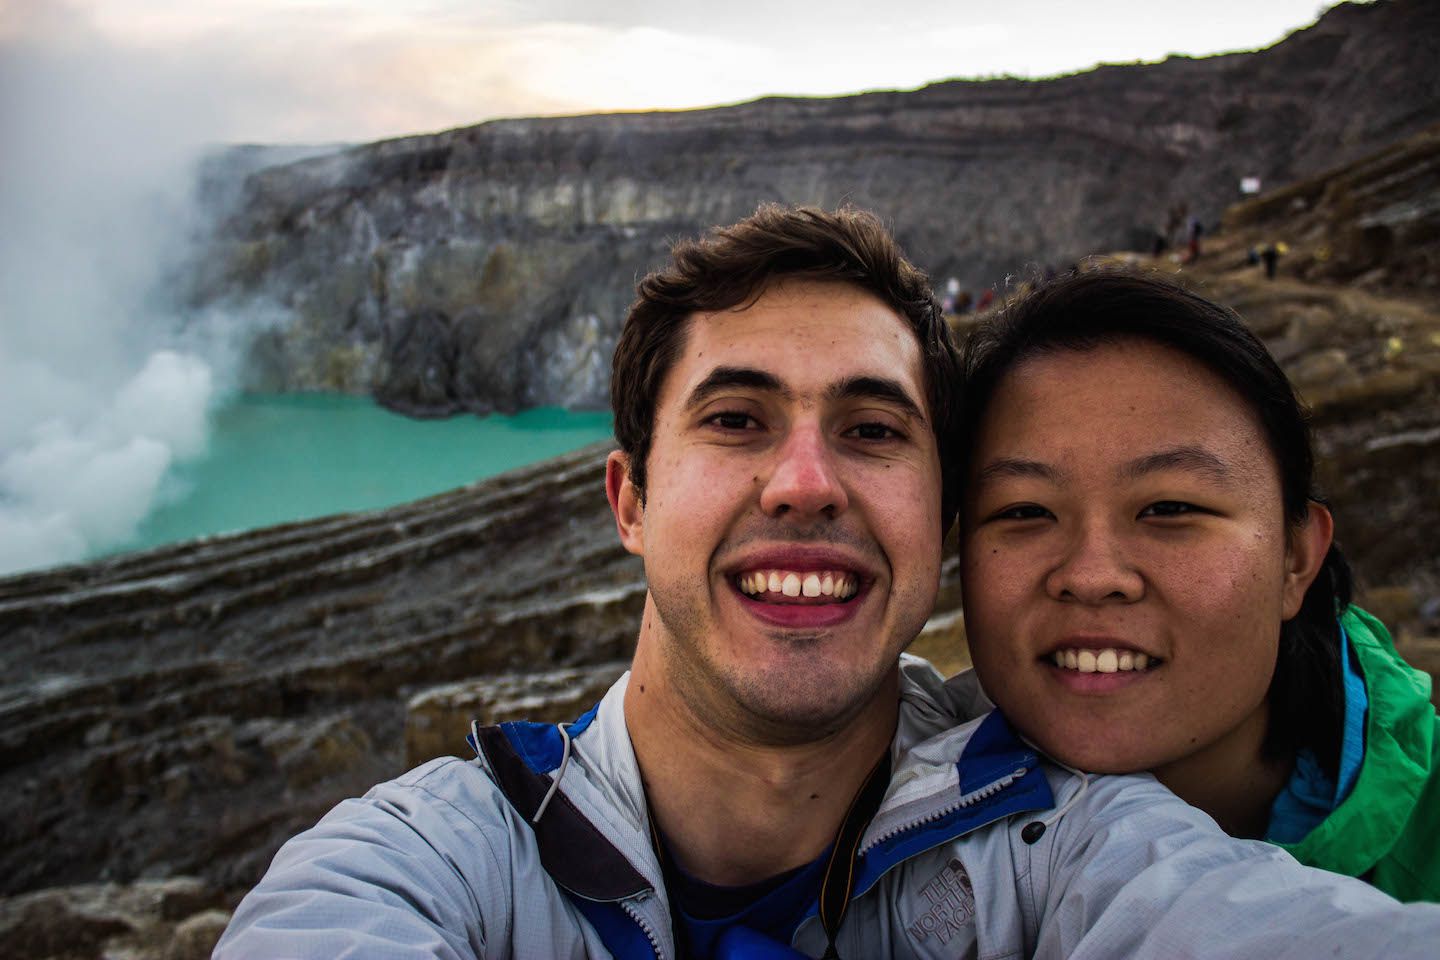 Julie and Carlos at the crater of Mt. Ijen, Indonesia